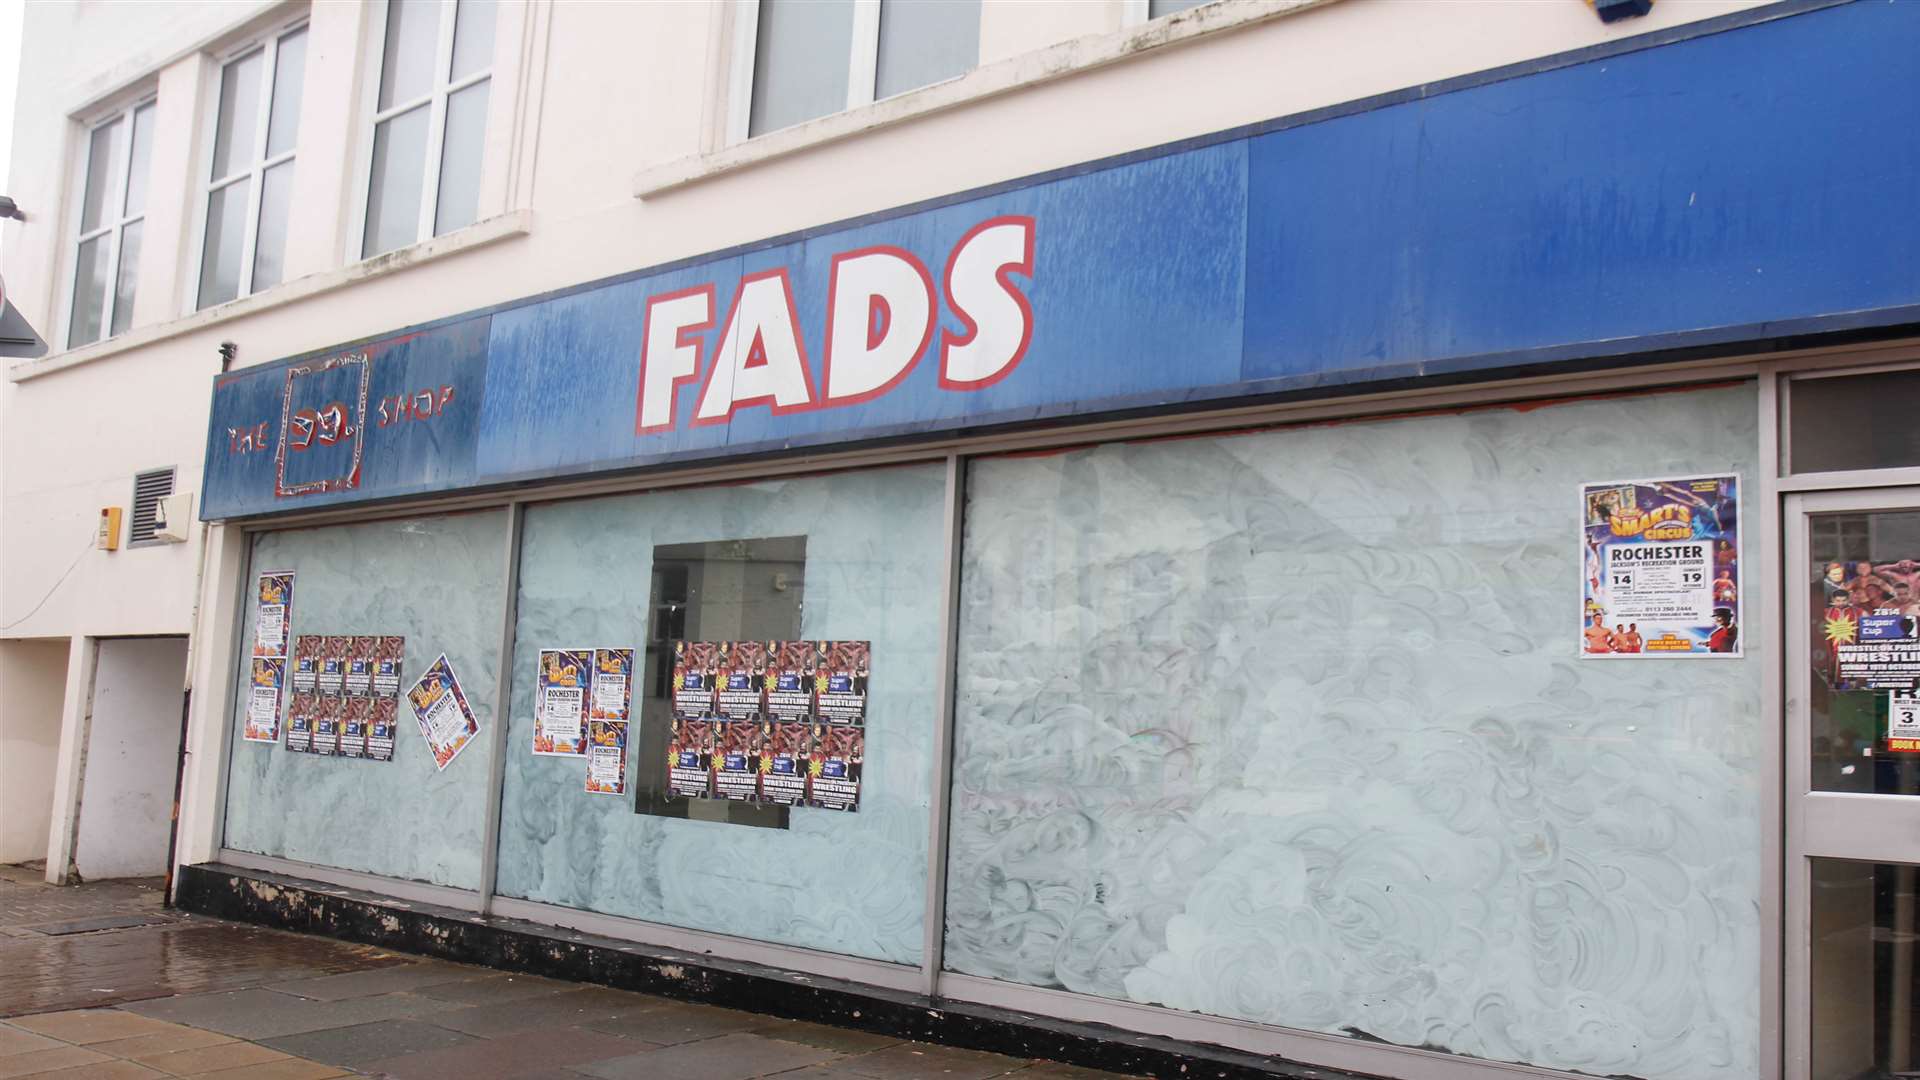 The old Fads building, Green Street, Gillingham